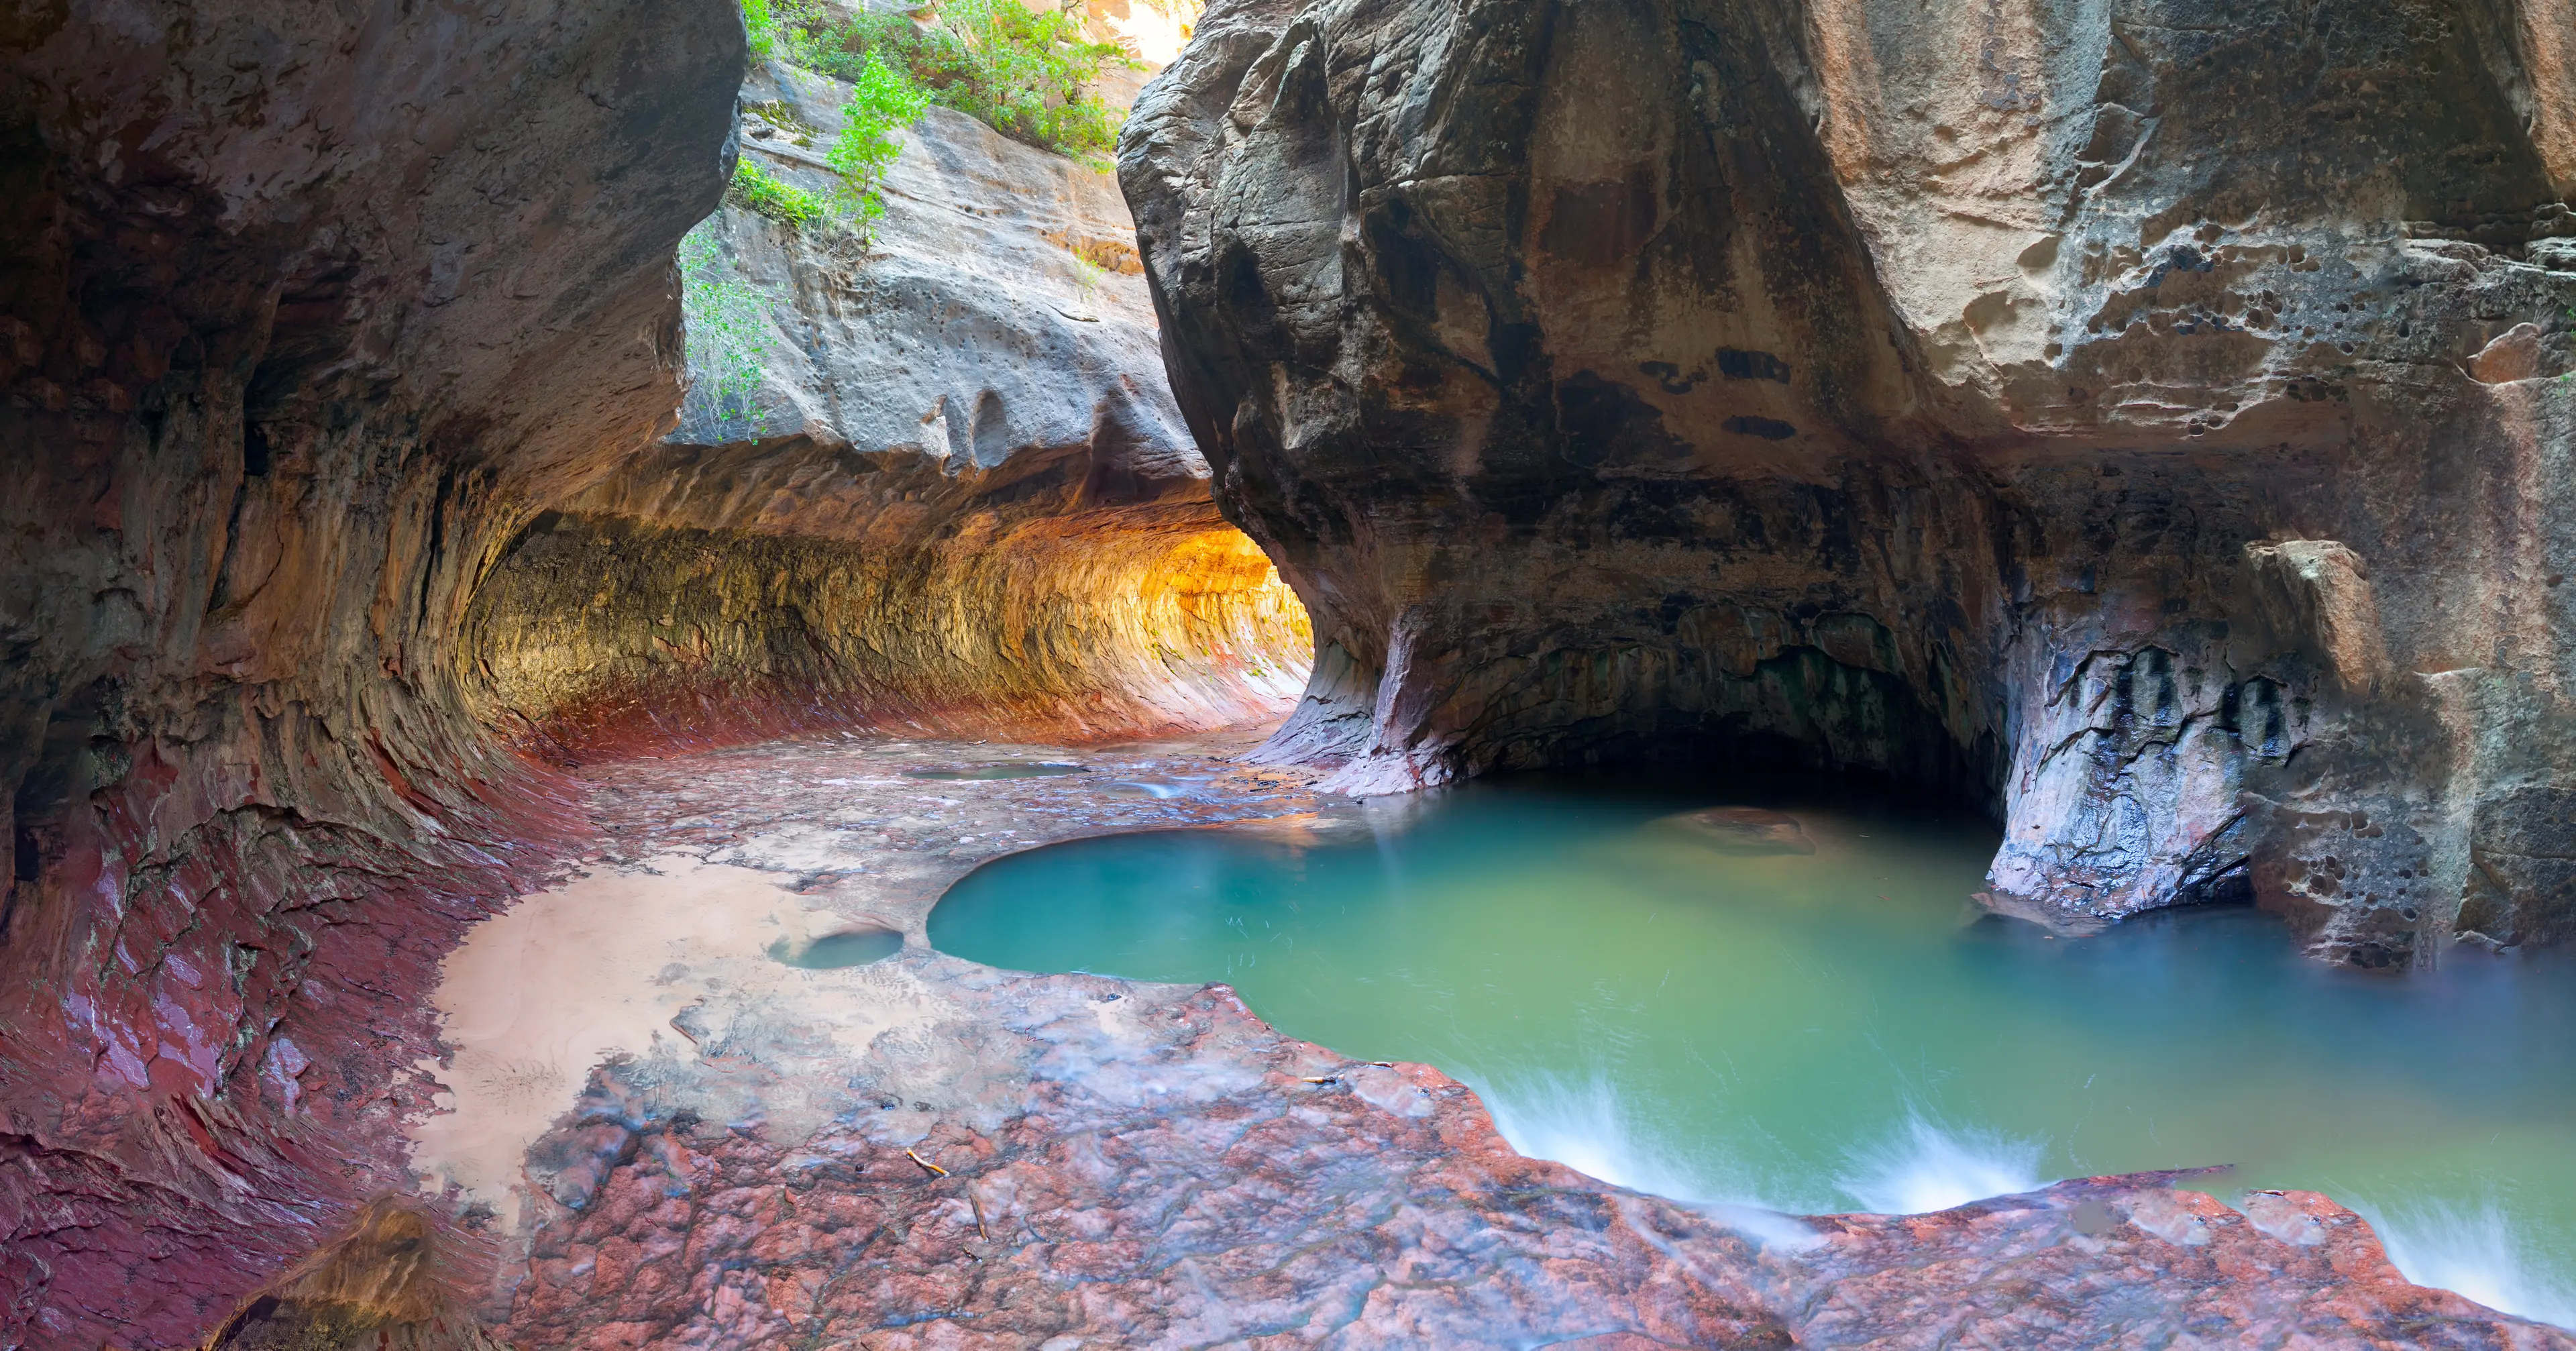 1-Day Family Adventure in Zion National Park for Locals